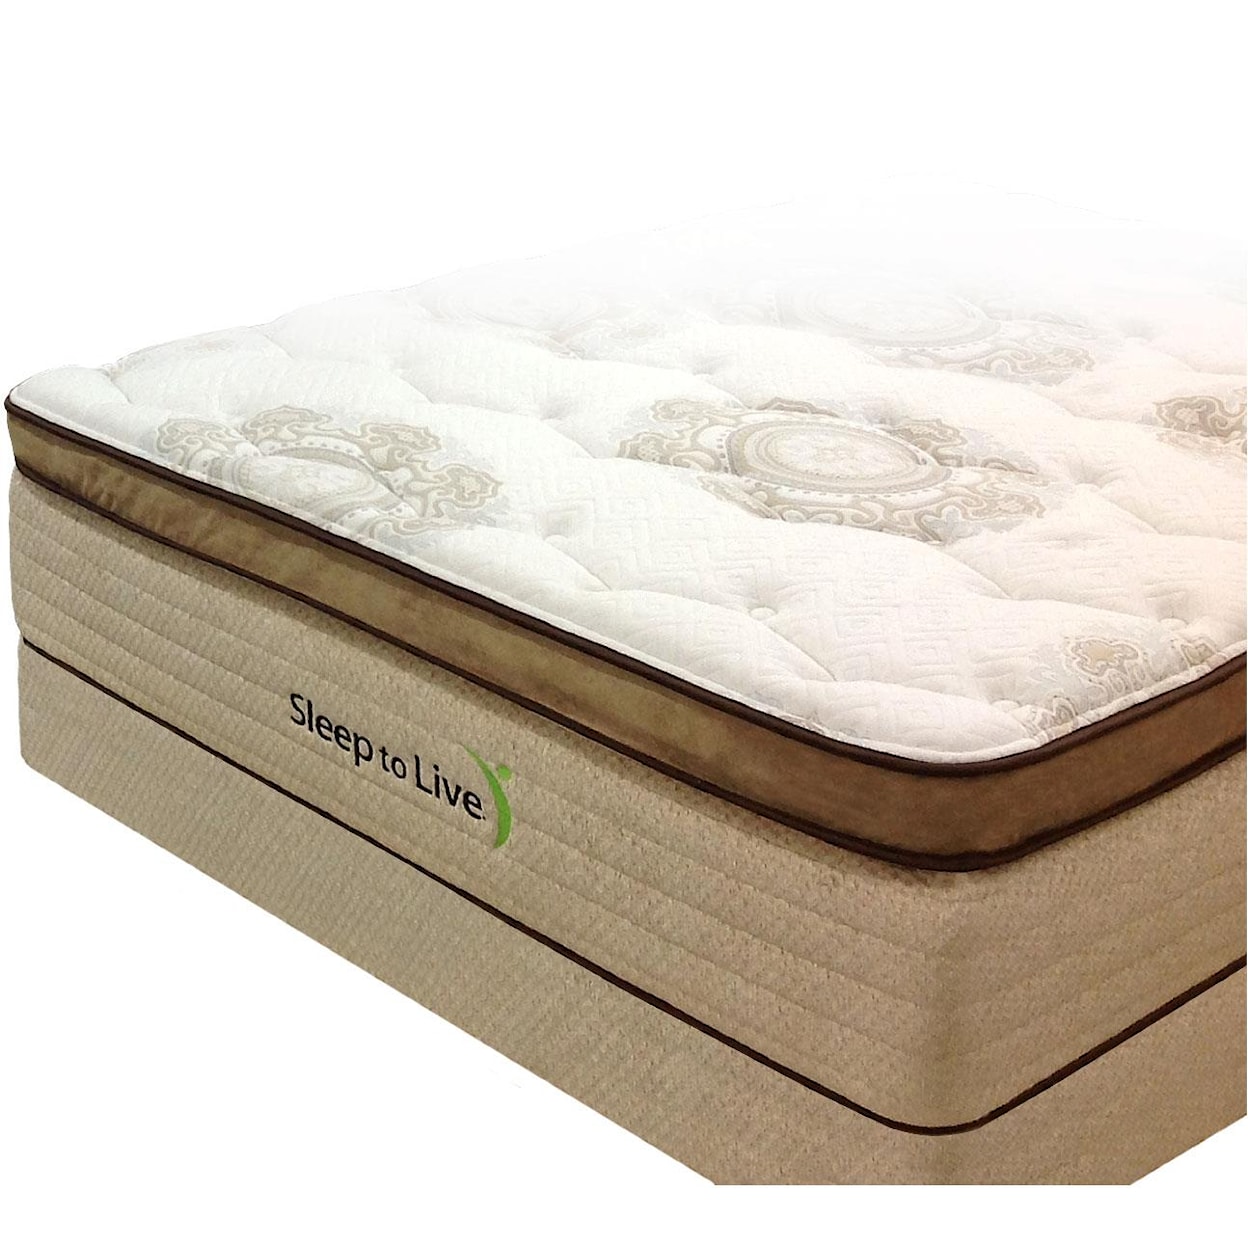 Kingsdown Body System 4 King Pocketed Coil Mattress